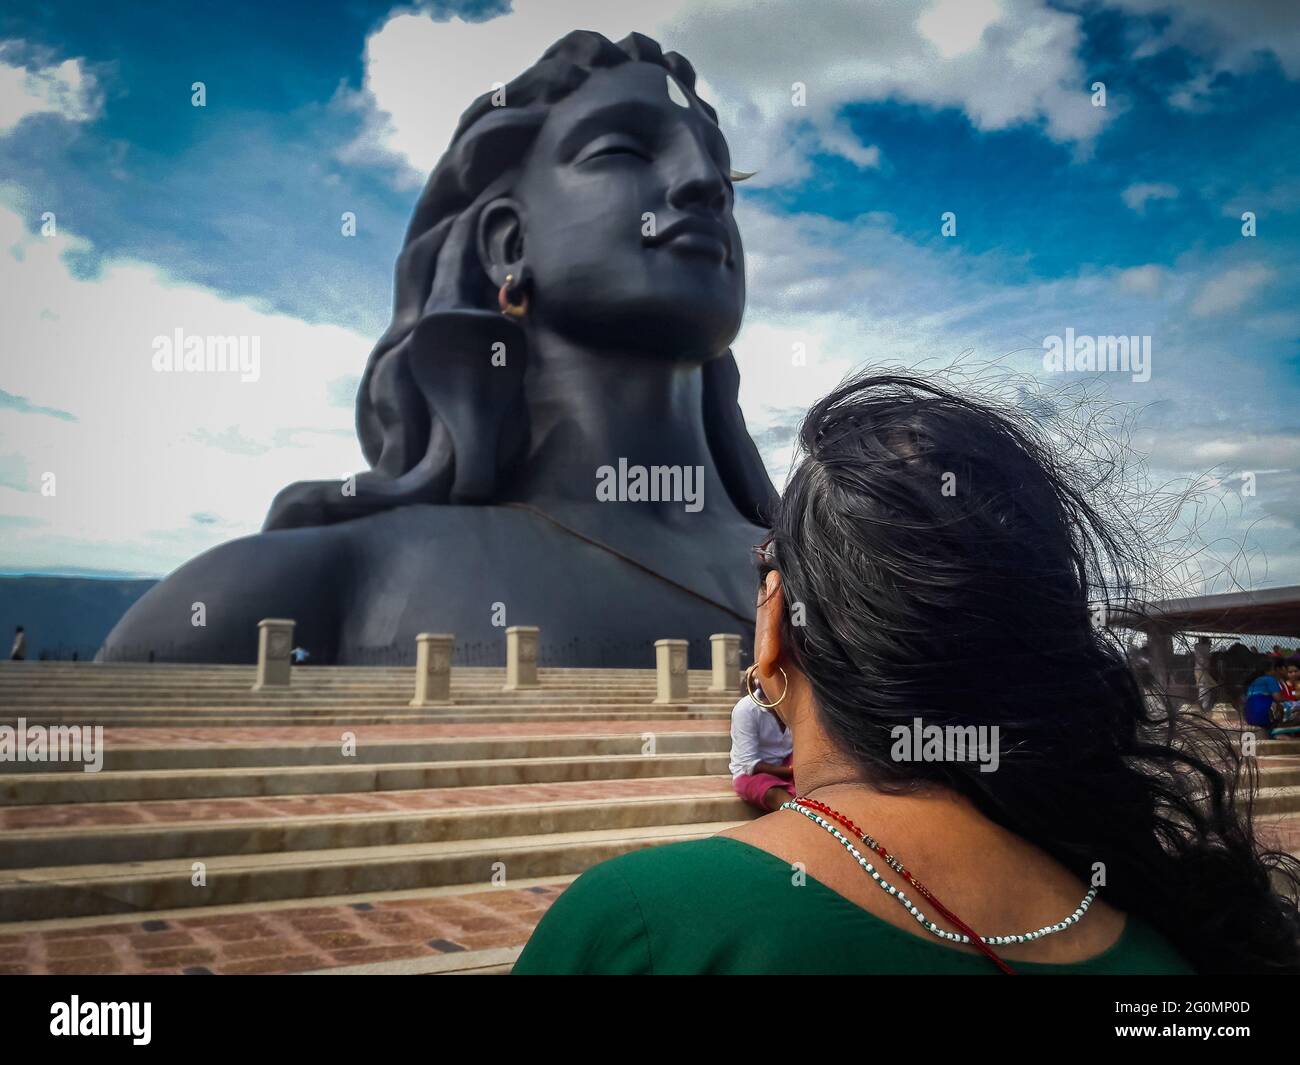 Devotee paying salutaion to the adiyogi shiva in yog asnam image is taken at coimbatore india showing the god statue in mountain and sky background. T Stock Photo